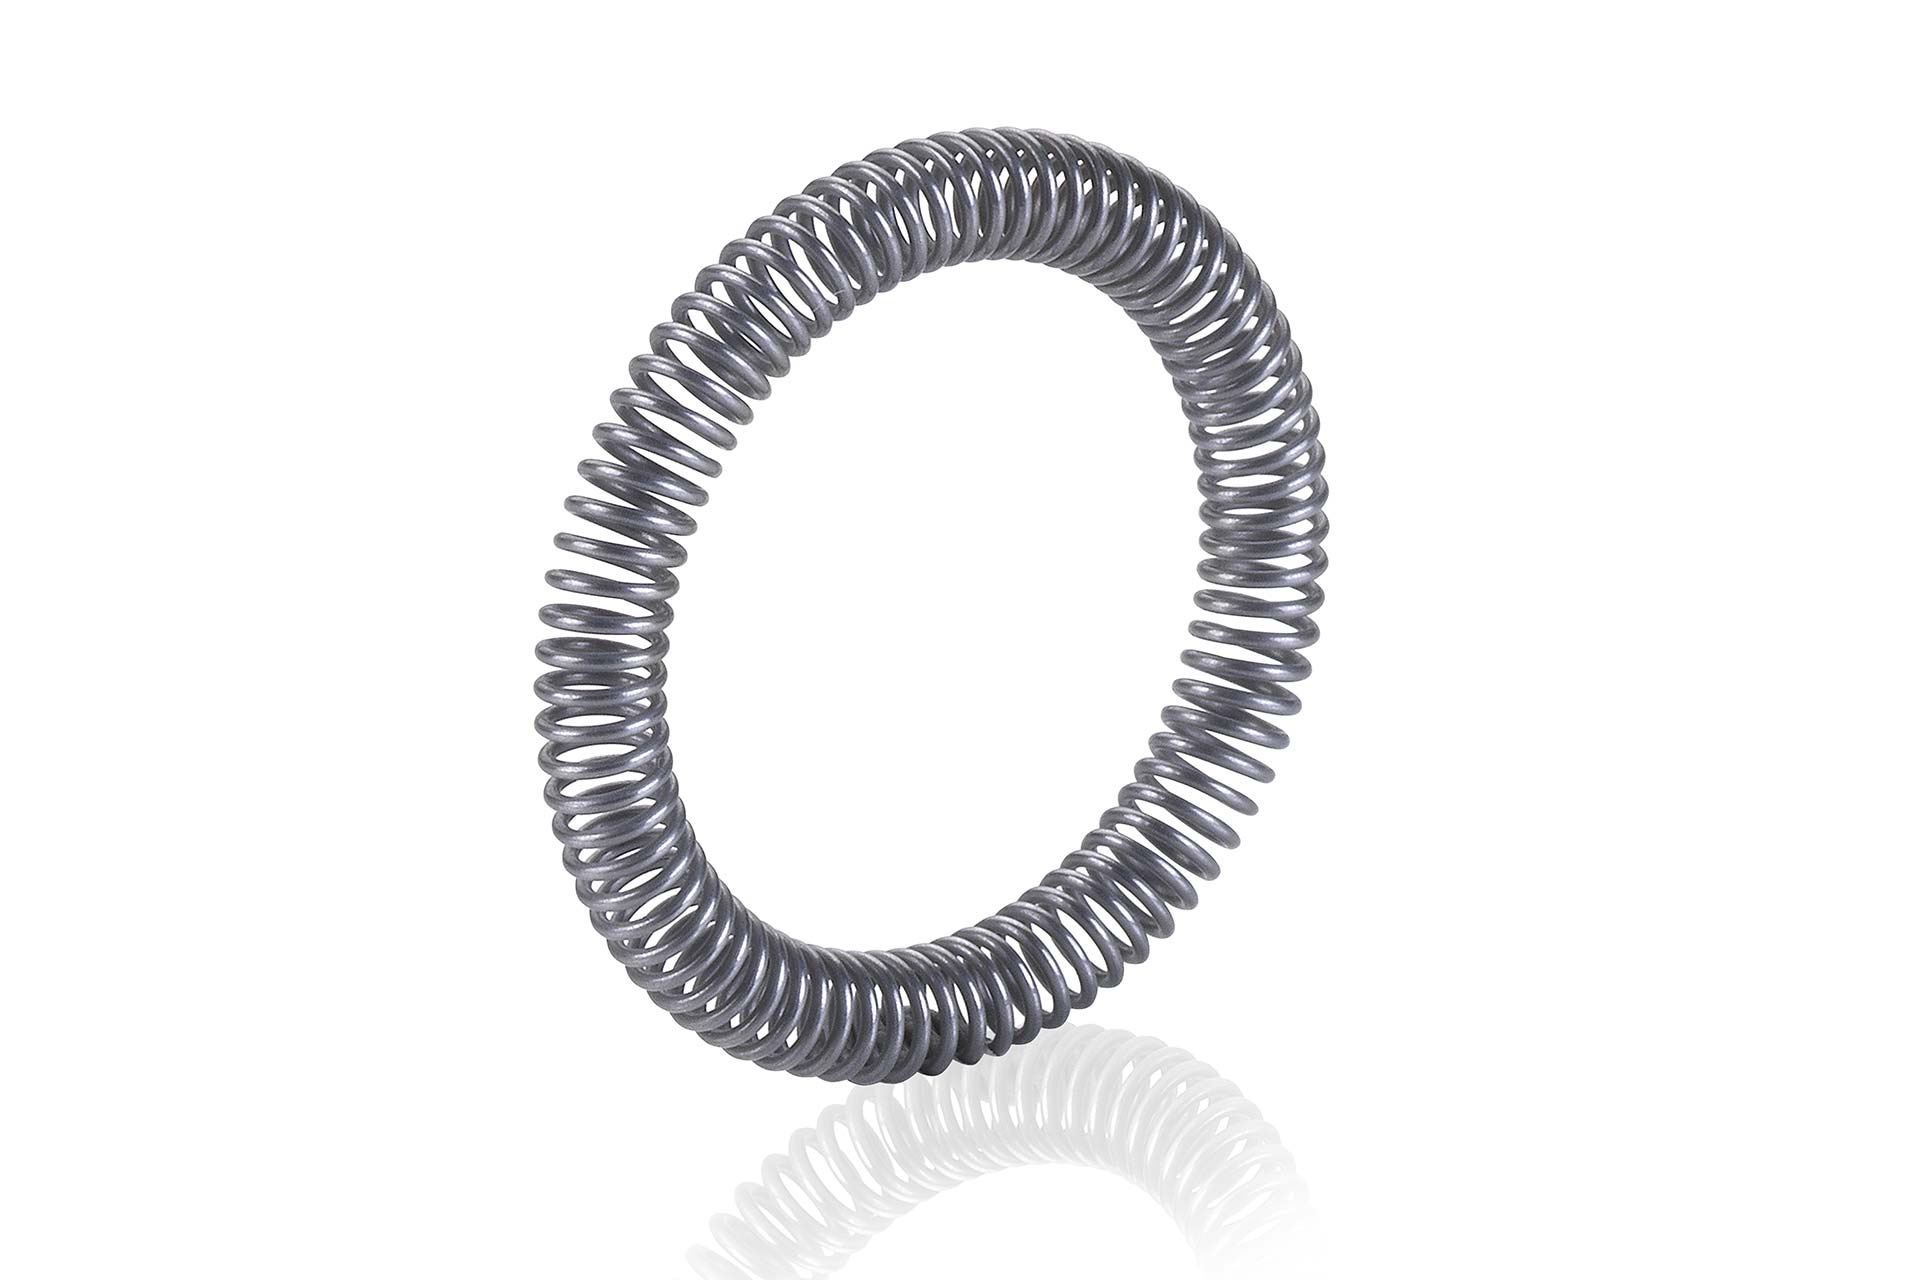 Nickel contact canted coil spring